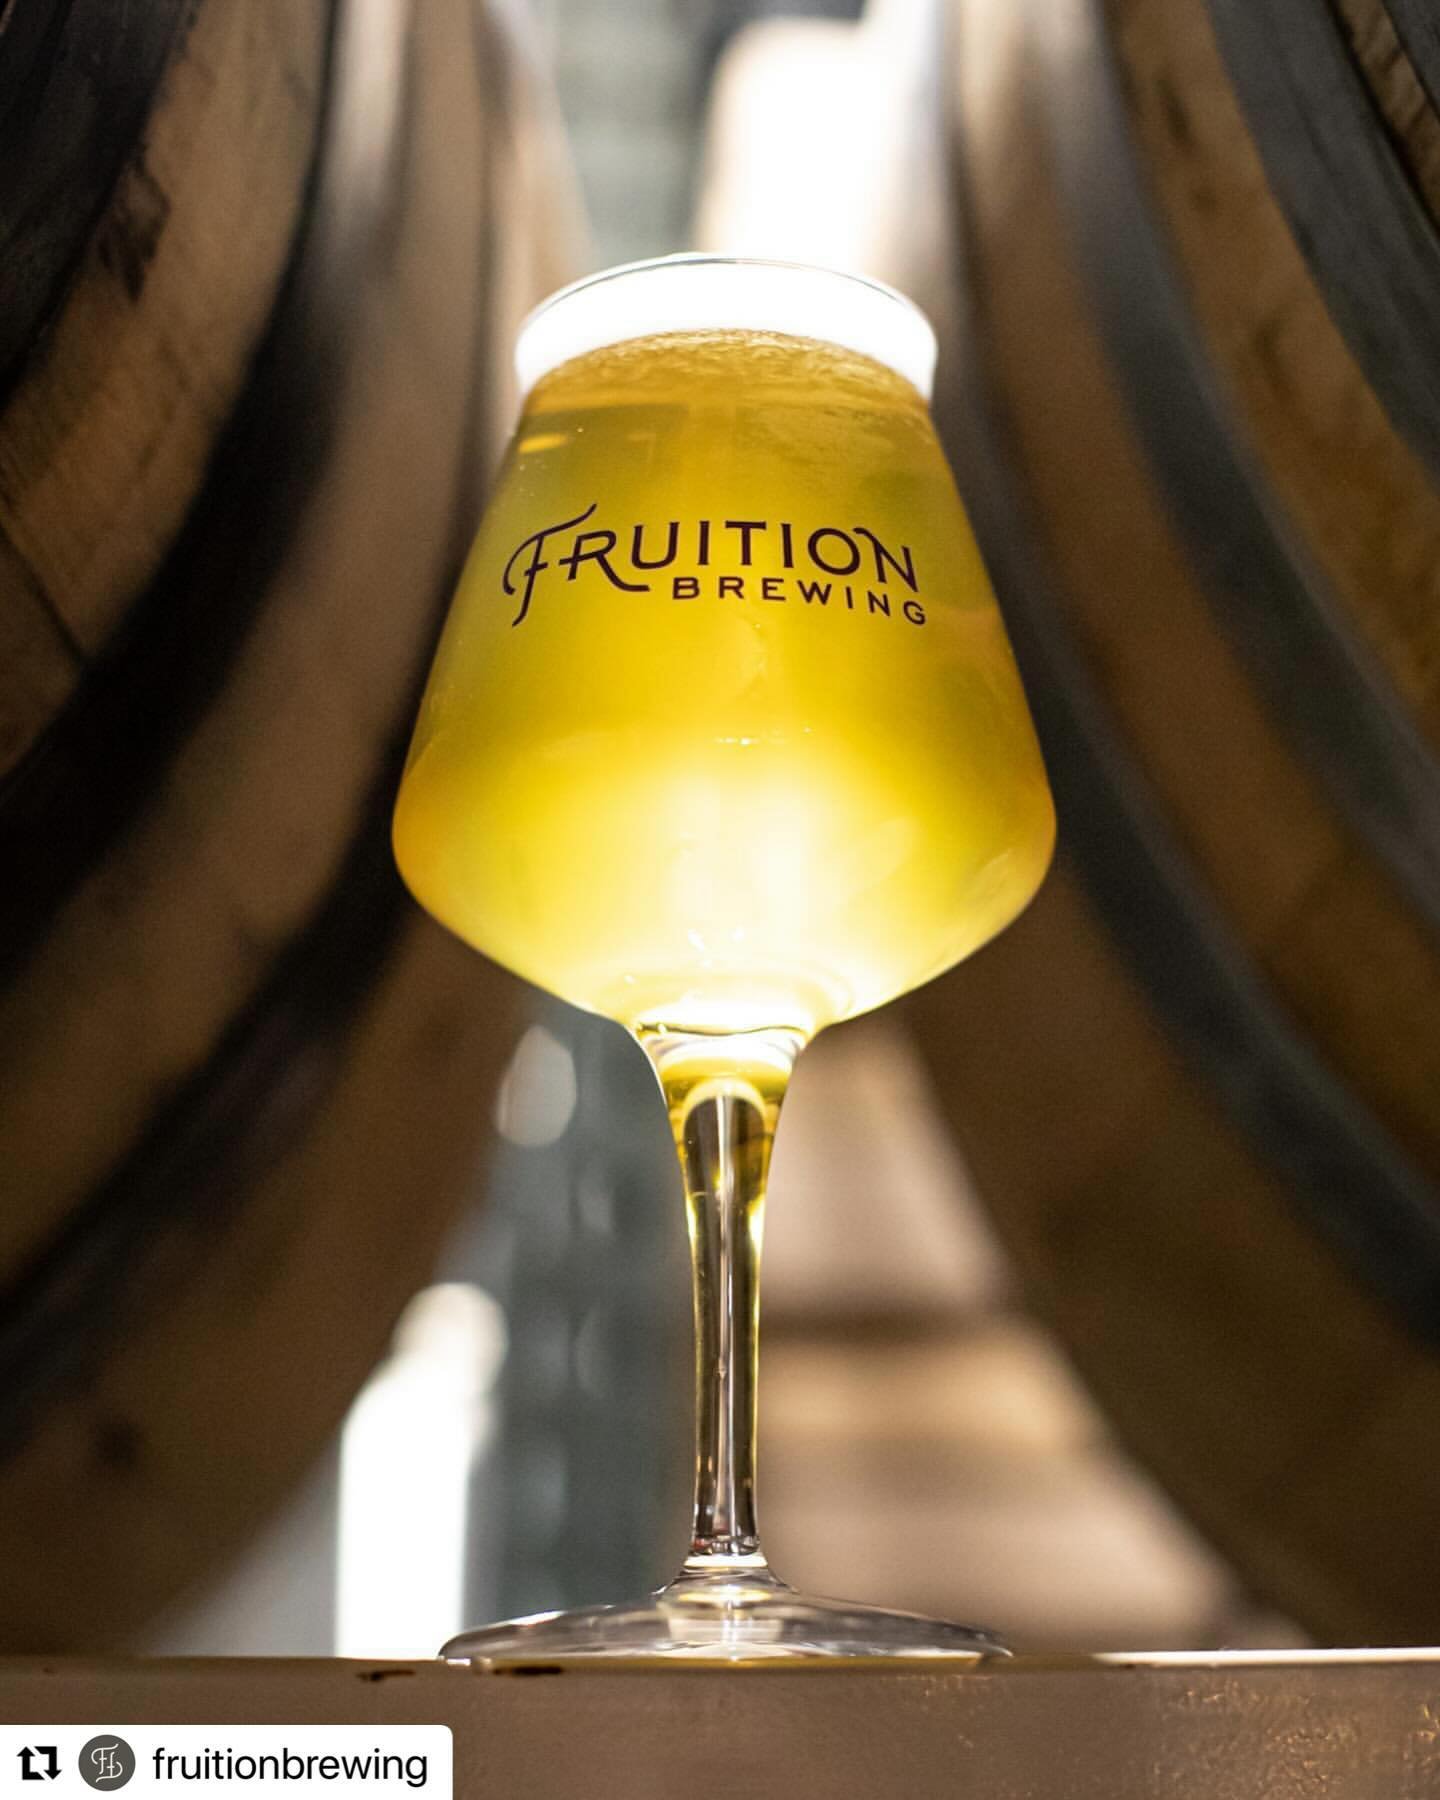 #Repost @fruitionbrewing
・・・
🗓️ This Week 🗓️
🍻
WED - Our monthly trivia night starts at 6:30!
THU - Our monthly &lsquo;Keep the Glass&rsquo; day!
SAT - 4/20: Hot Cheeto deluxe grilled cheeses, flamin&rsquo; hot micheladas, &amp; brownies will be o